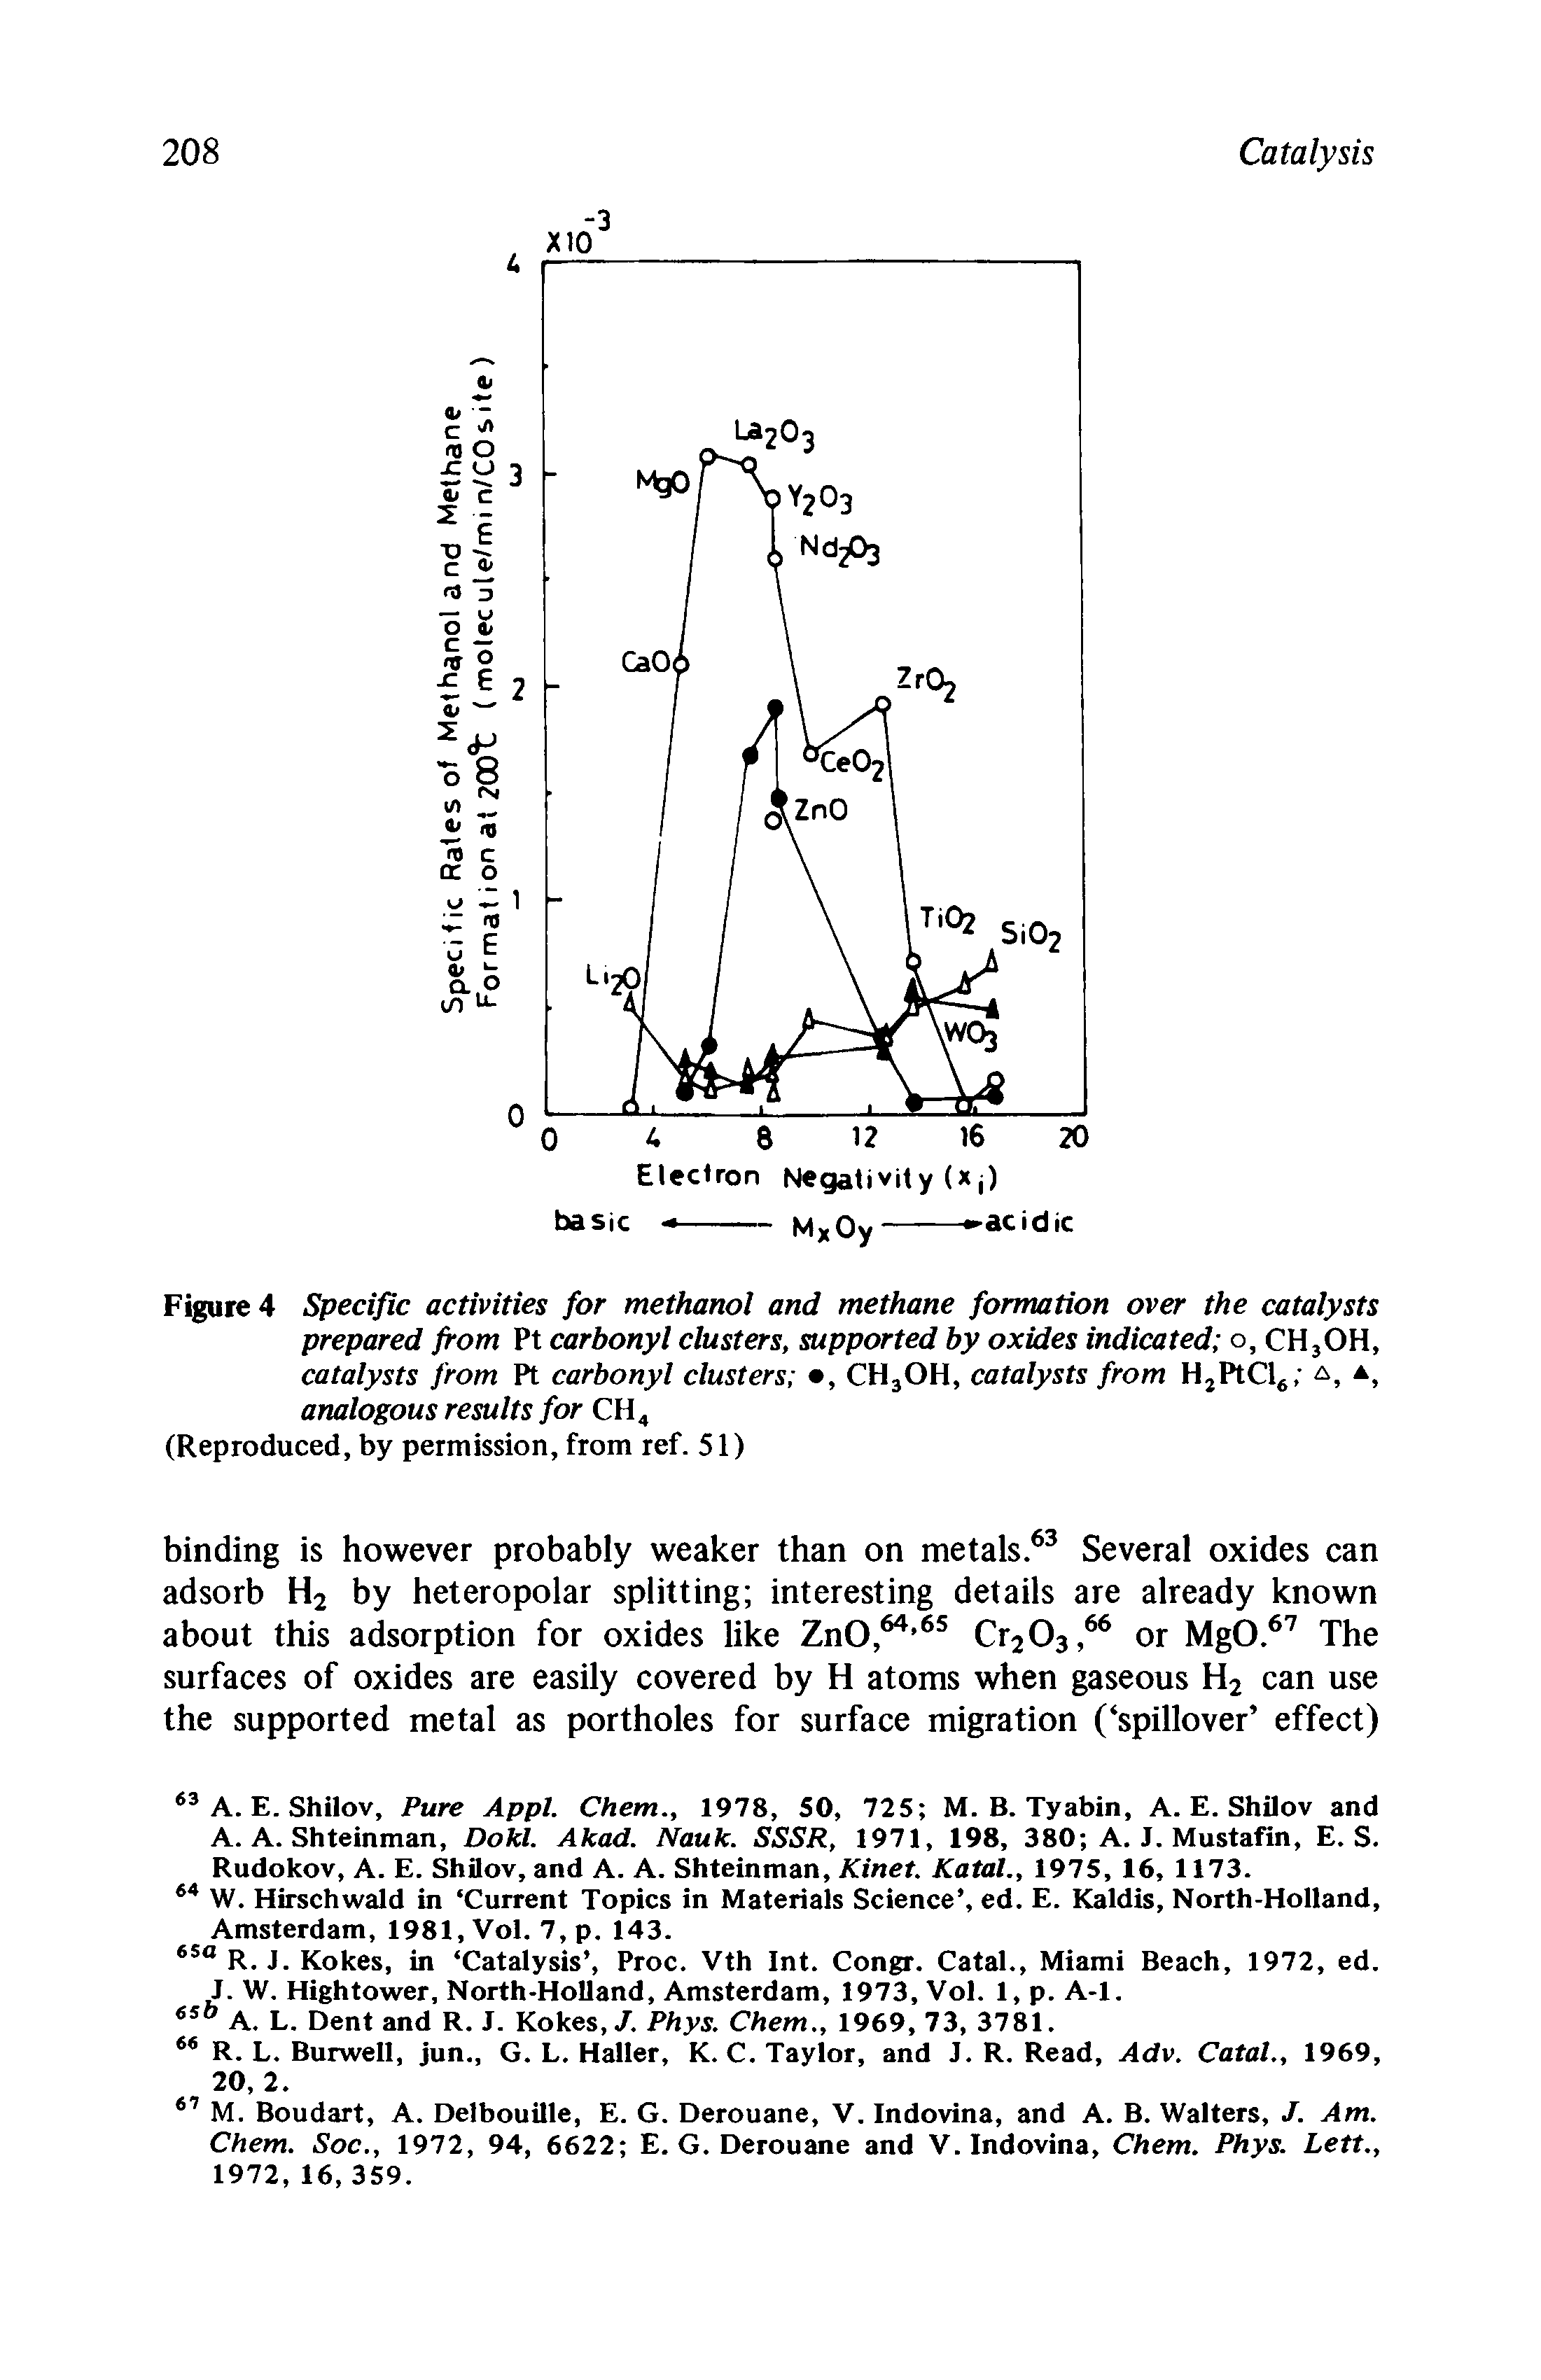 Figure 4 Specific activities for methanol and methane formation over the catalysts prepared from Pt carbonyl clusters, supported by oxides indicated o, CHjOH, catalysts from Pt carbonyl clusters , CH3OH, catalysts from HjPtCl analogous results for CH4 (Reproduced, by permission, from ref. 51)...